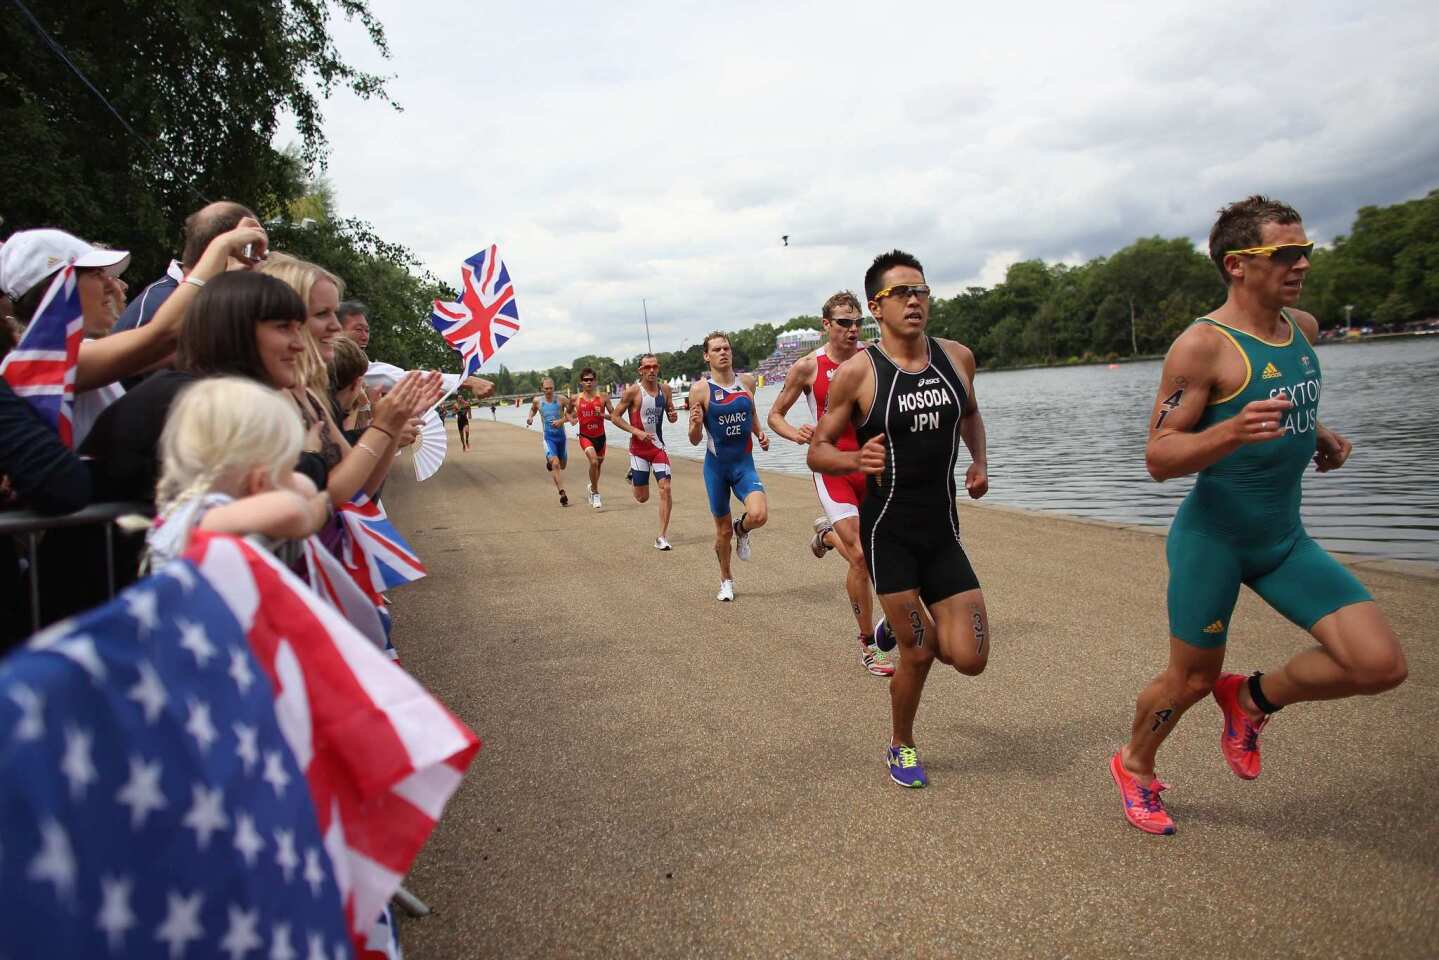 Athletes compete in the running stage of the men's triathlon through Hyde Park.